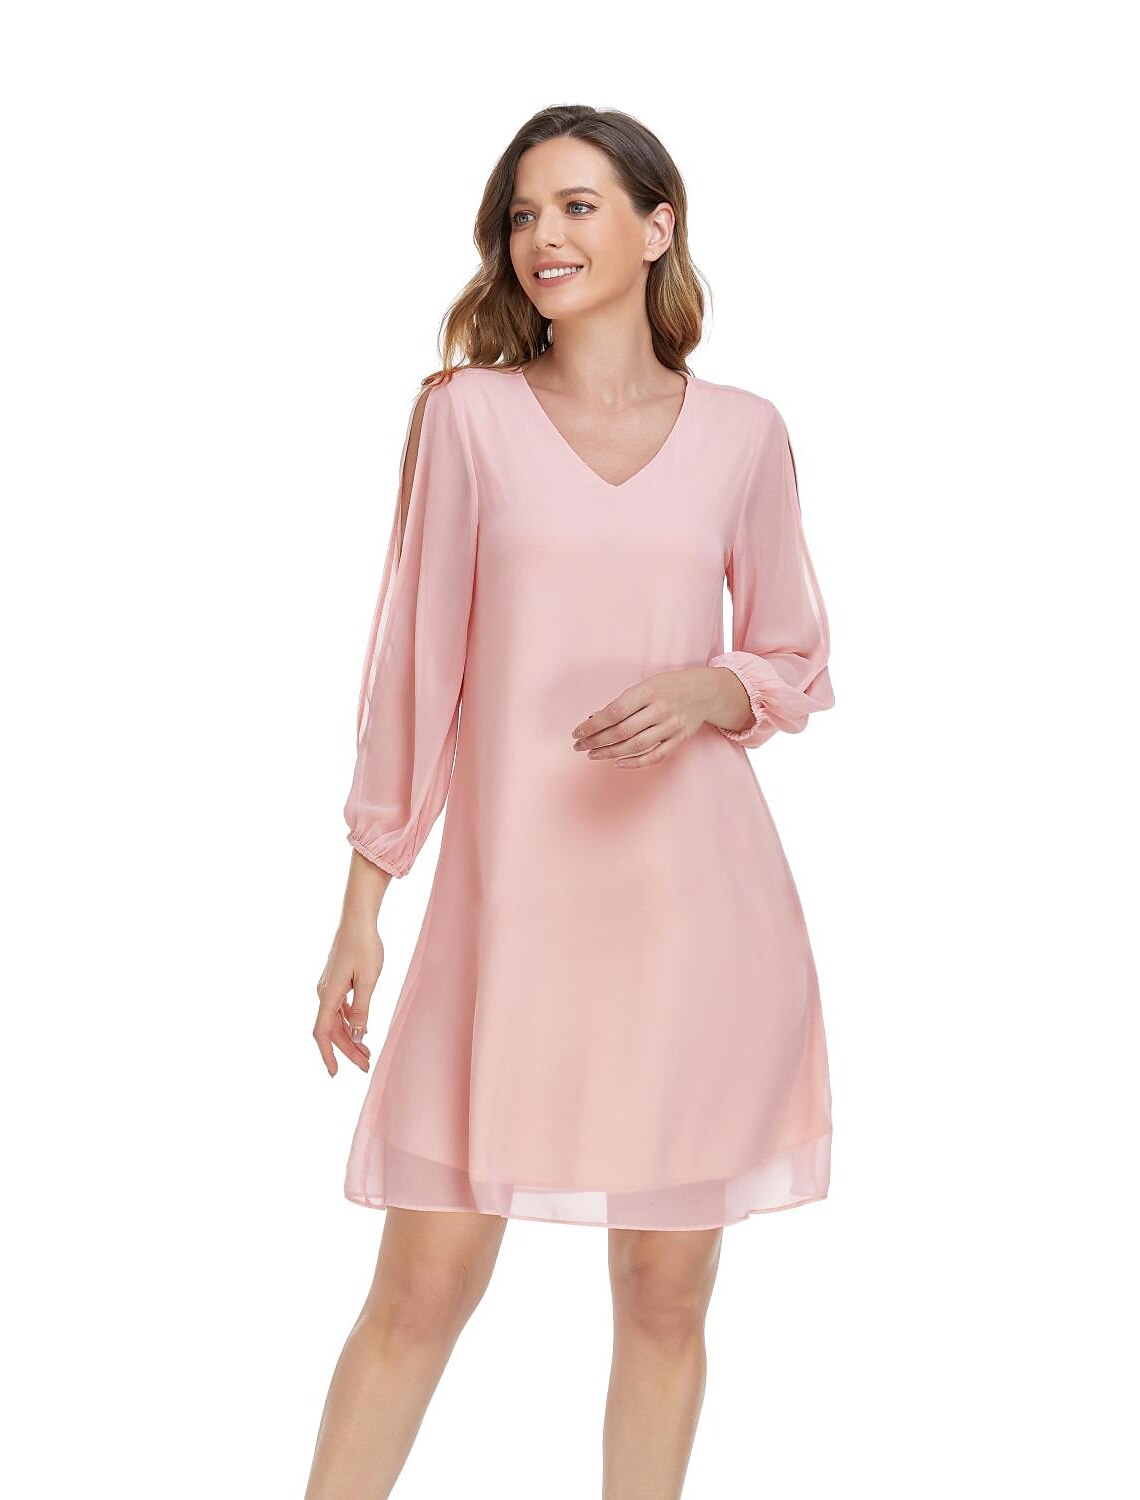 A-Line Empire Homecoming Cocktail Party Dress V Neck 3/4 Length Sleeve Short / Mini Chiffon with Slit Pure Color